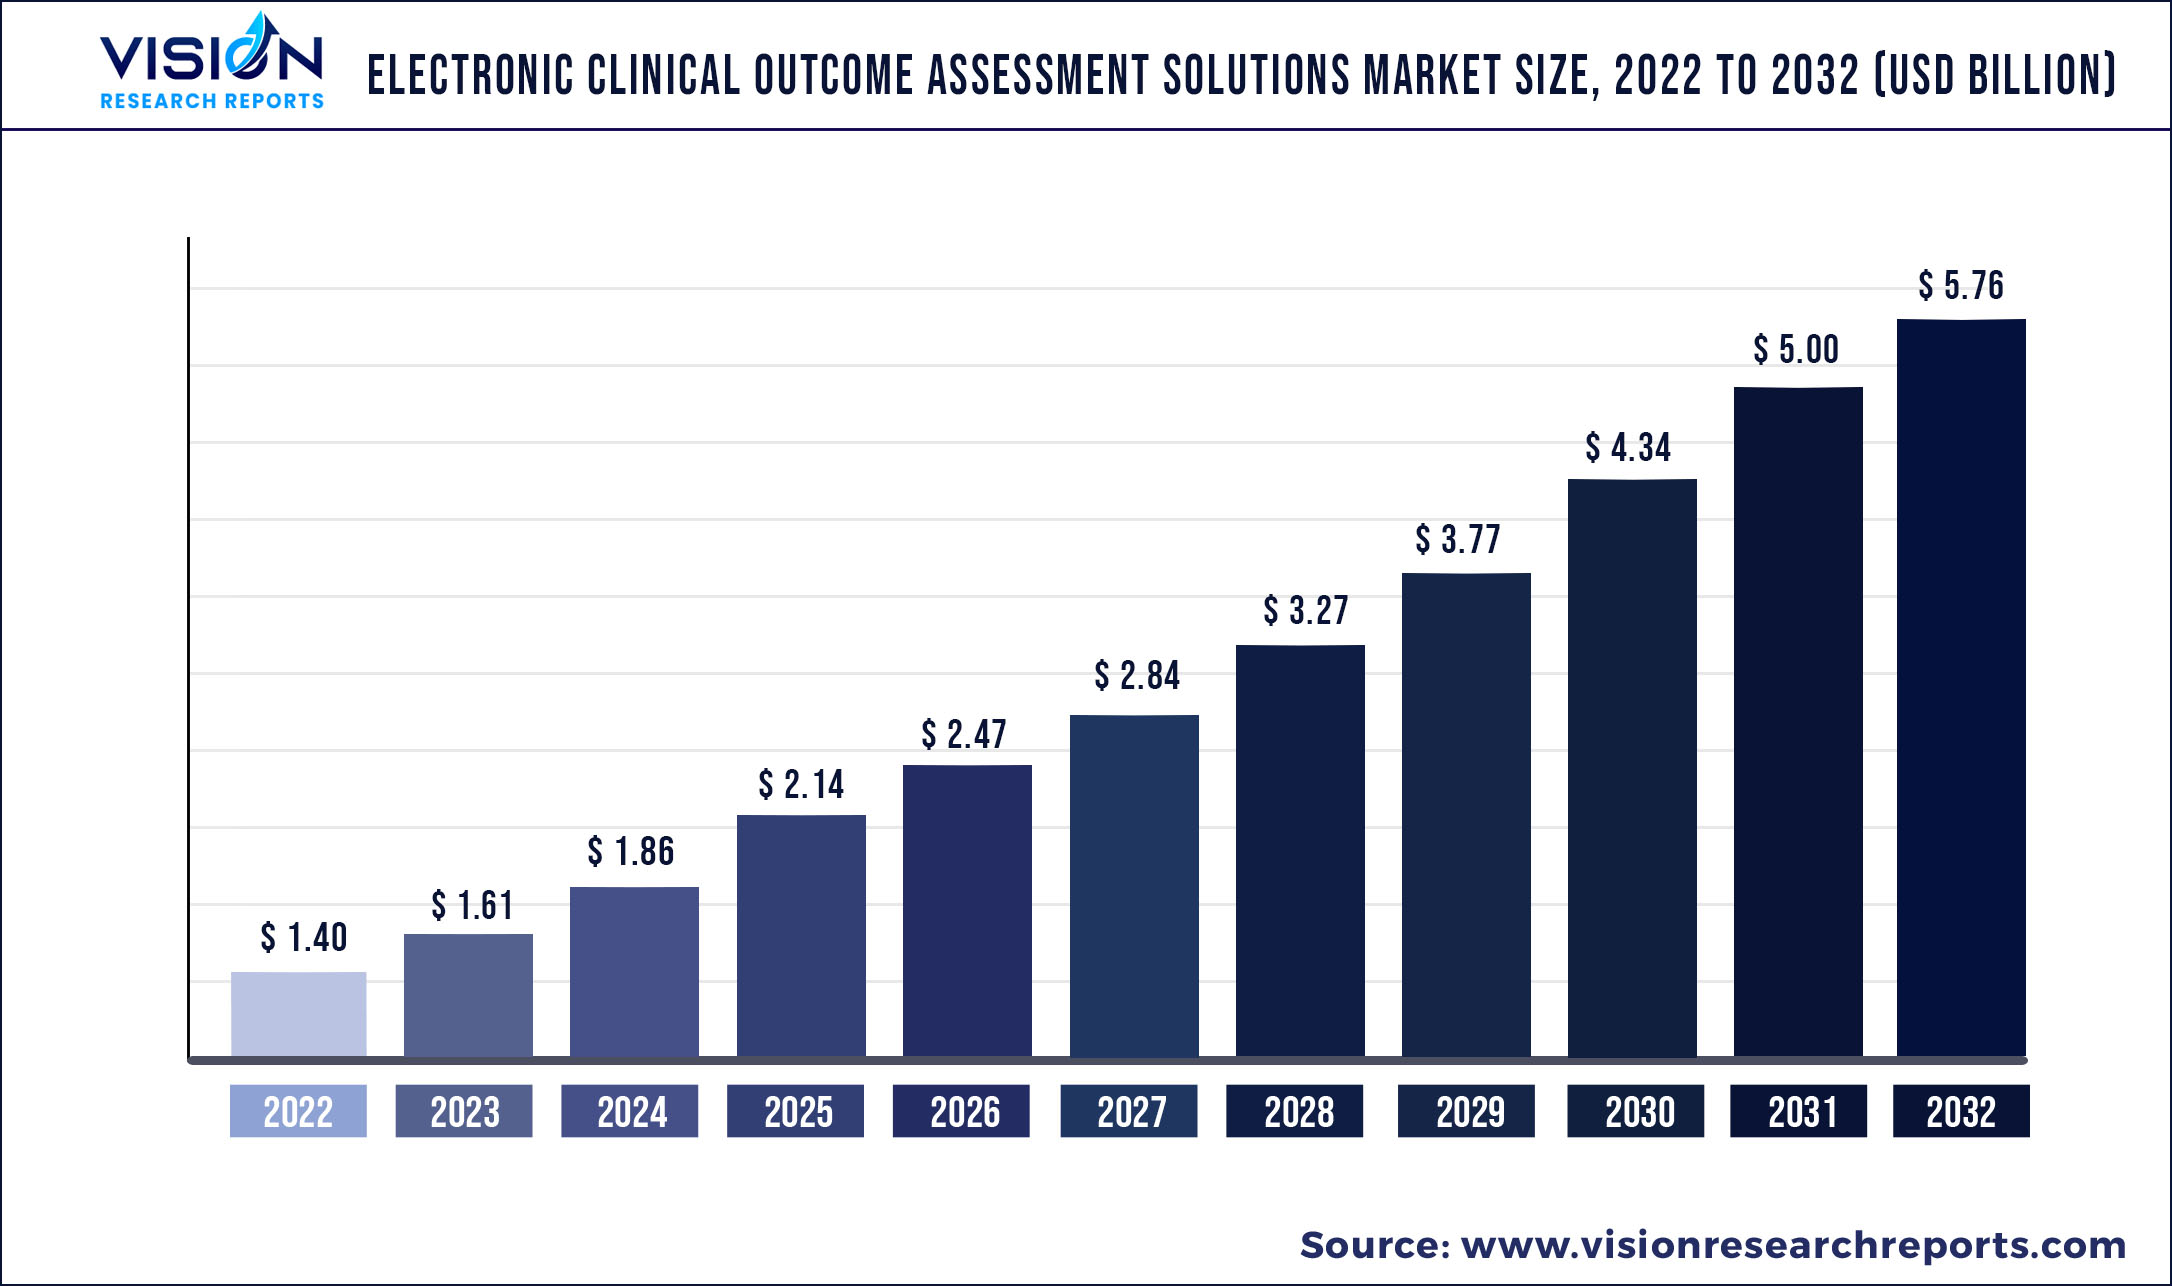 Electronic Clinical Outcome Assessment Solutions Market Size 2022 to 2032